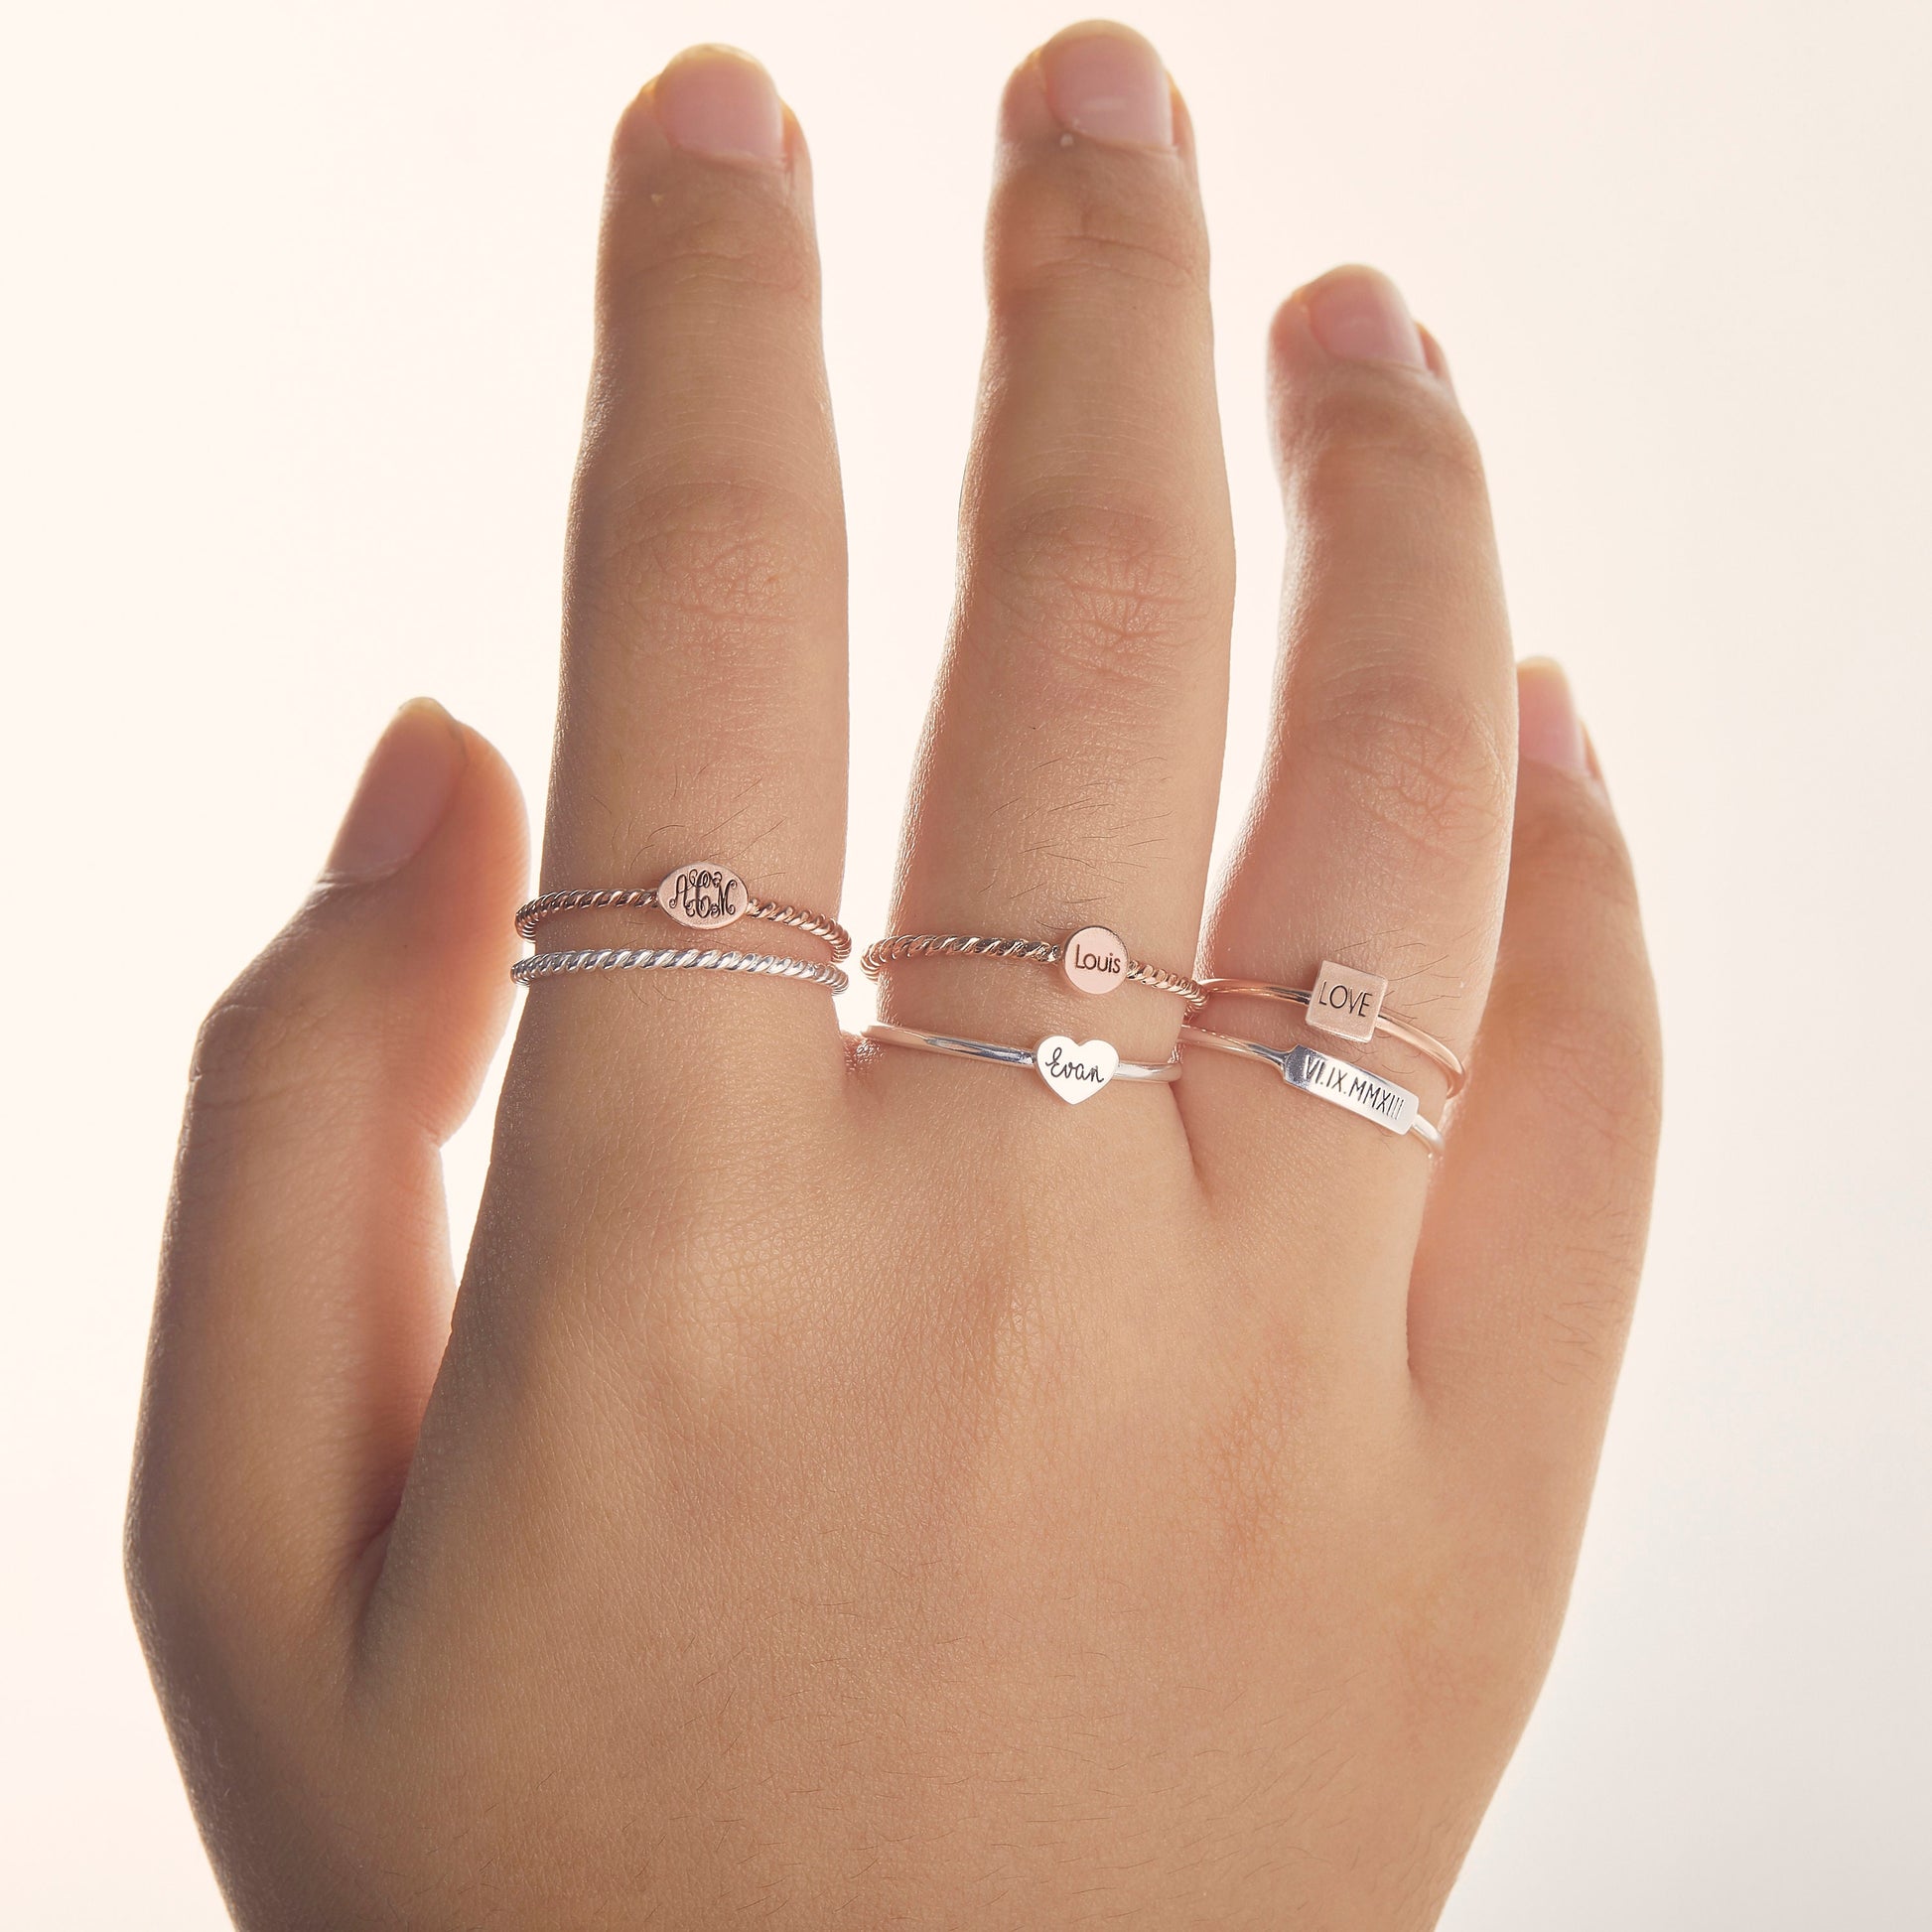 Personalized Stacking Ring | Engraved Dainty Ring | Custom Name Ring | Promise Silver Ring | Stackable Ring | Family Ring | Minimalist Ring